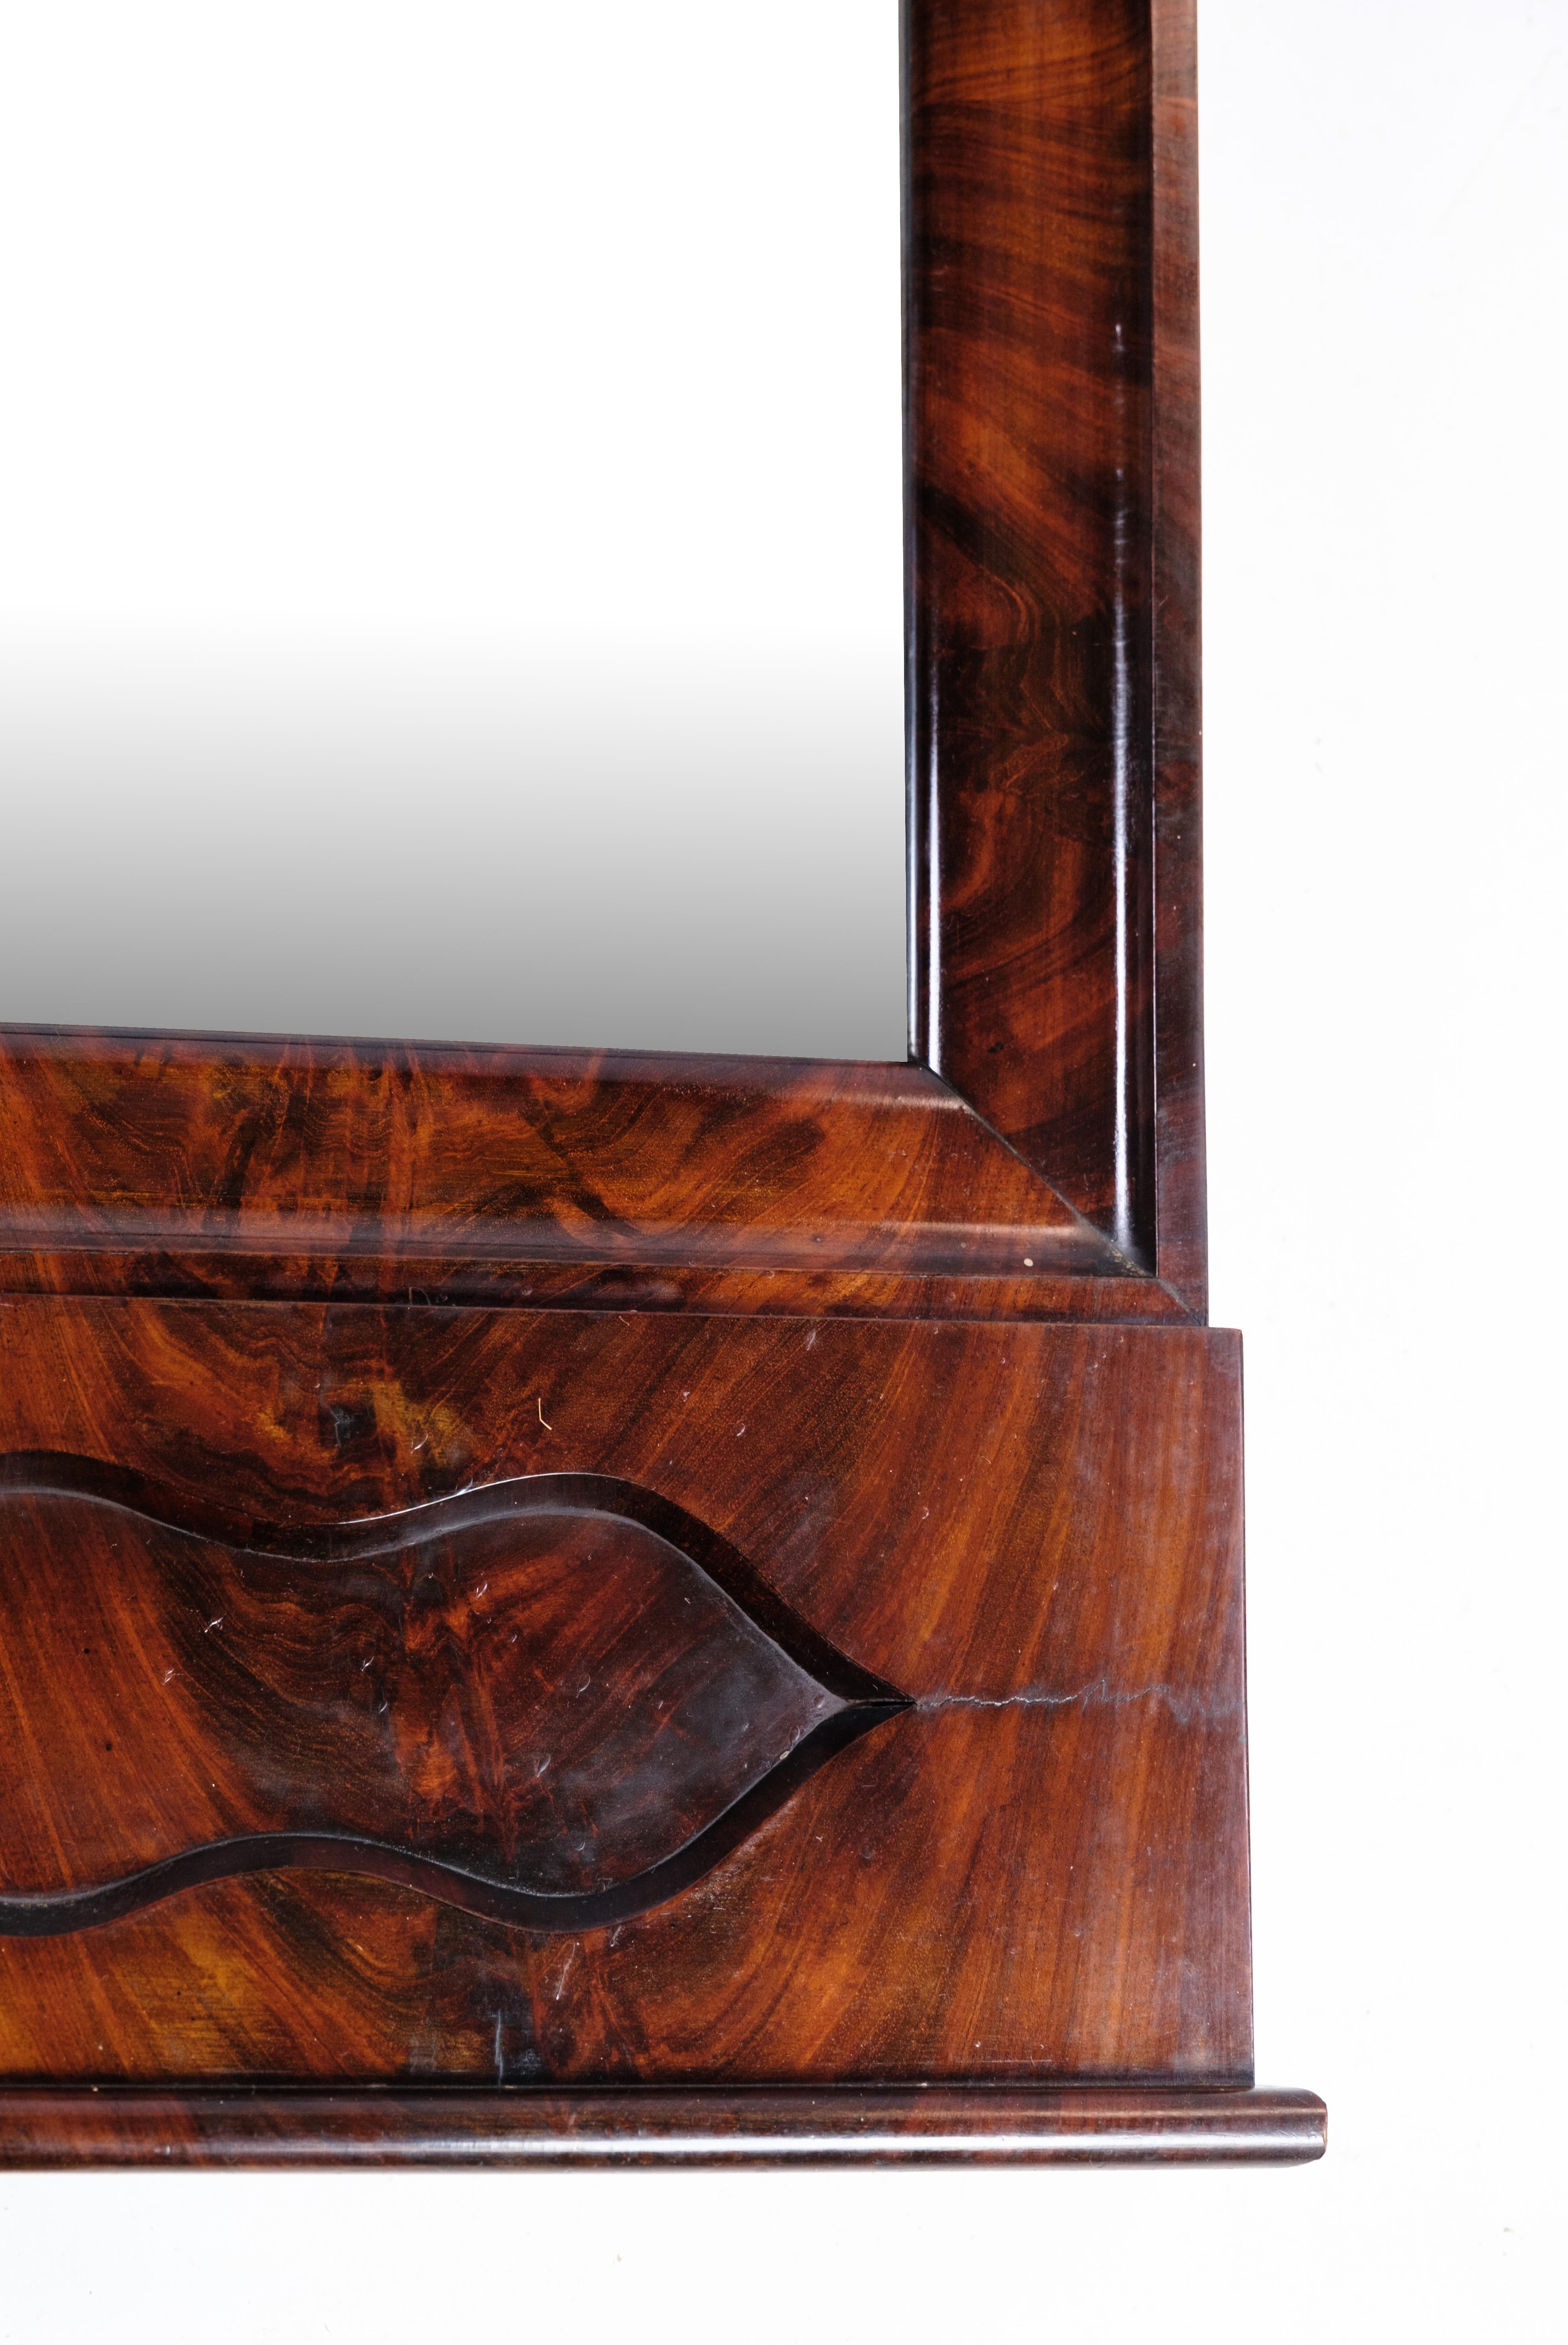 Antique mirror in mahogany wood from the late Empire period from around the 1840s.
Dimensions in cm: H:152 W:67.